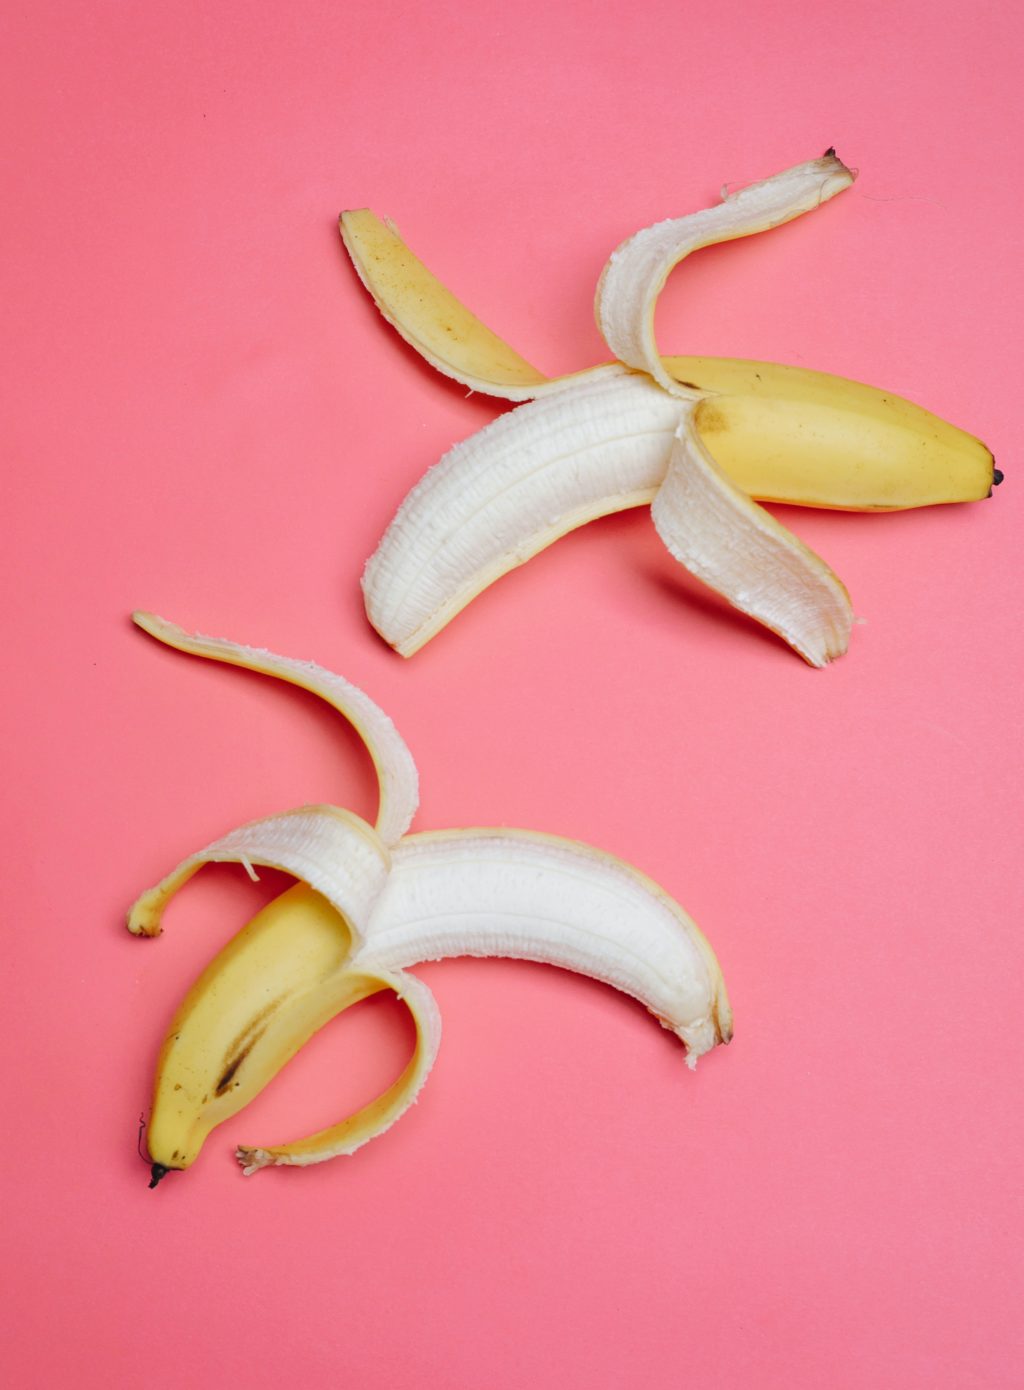 Two peeled bananas on a pink surface